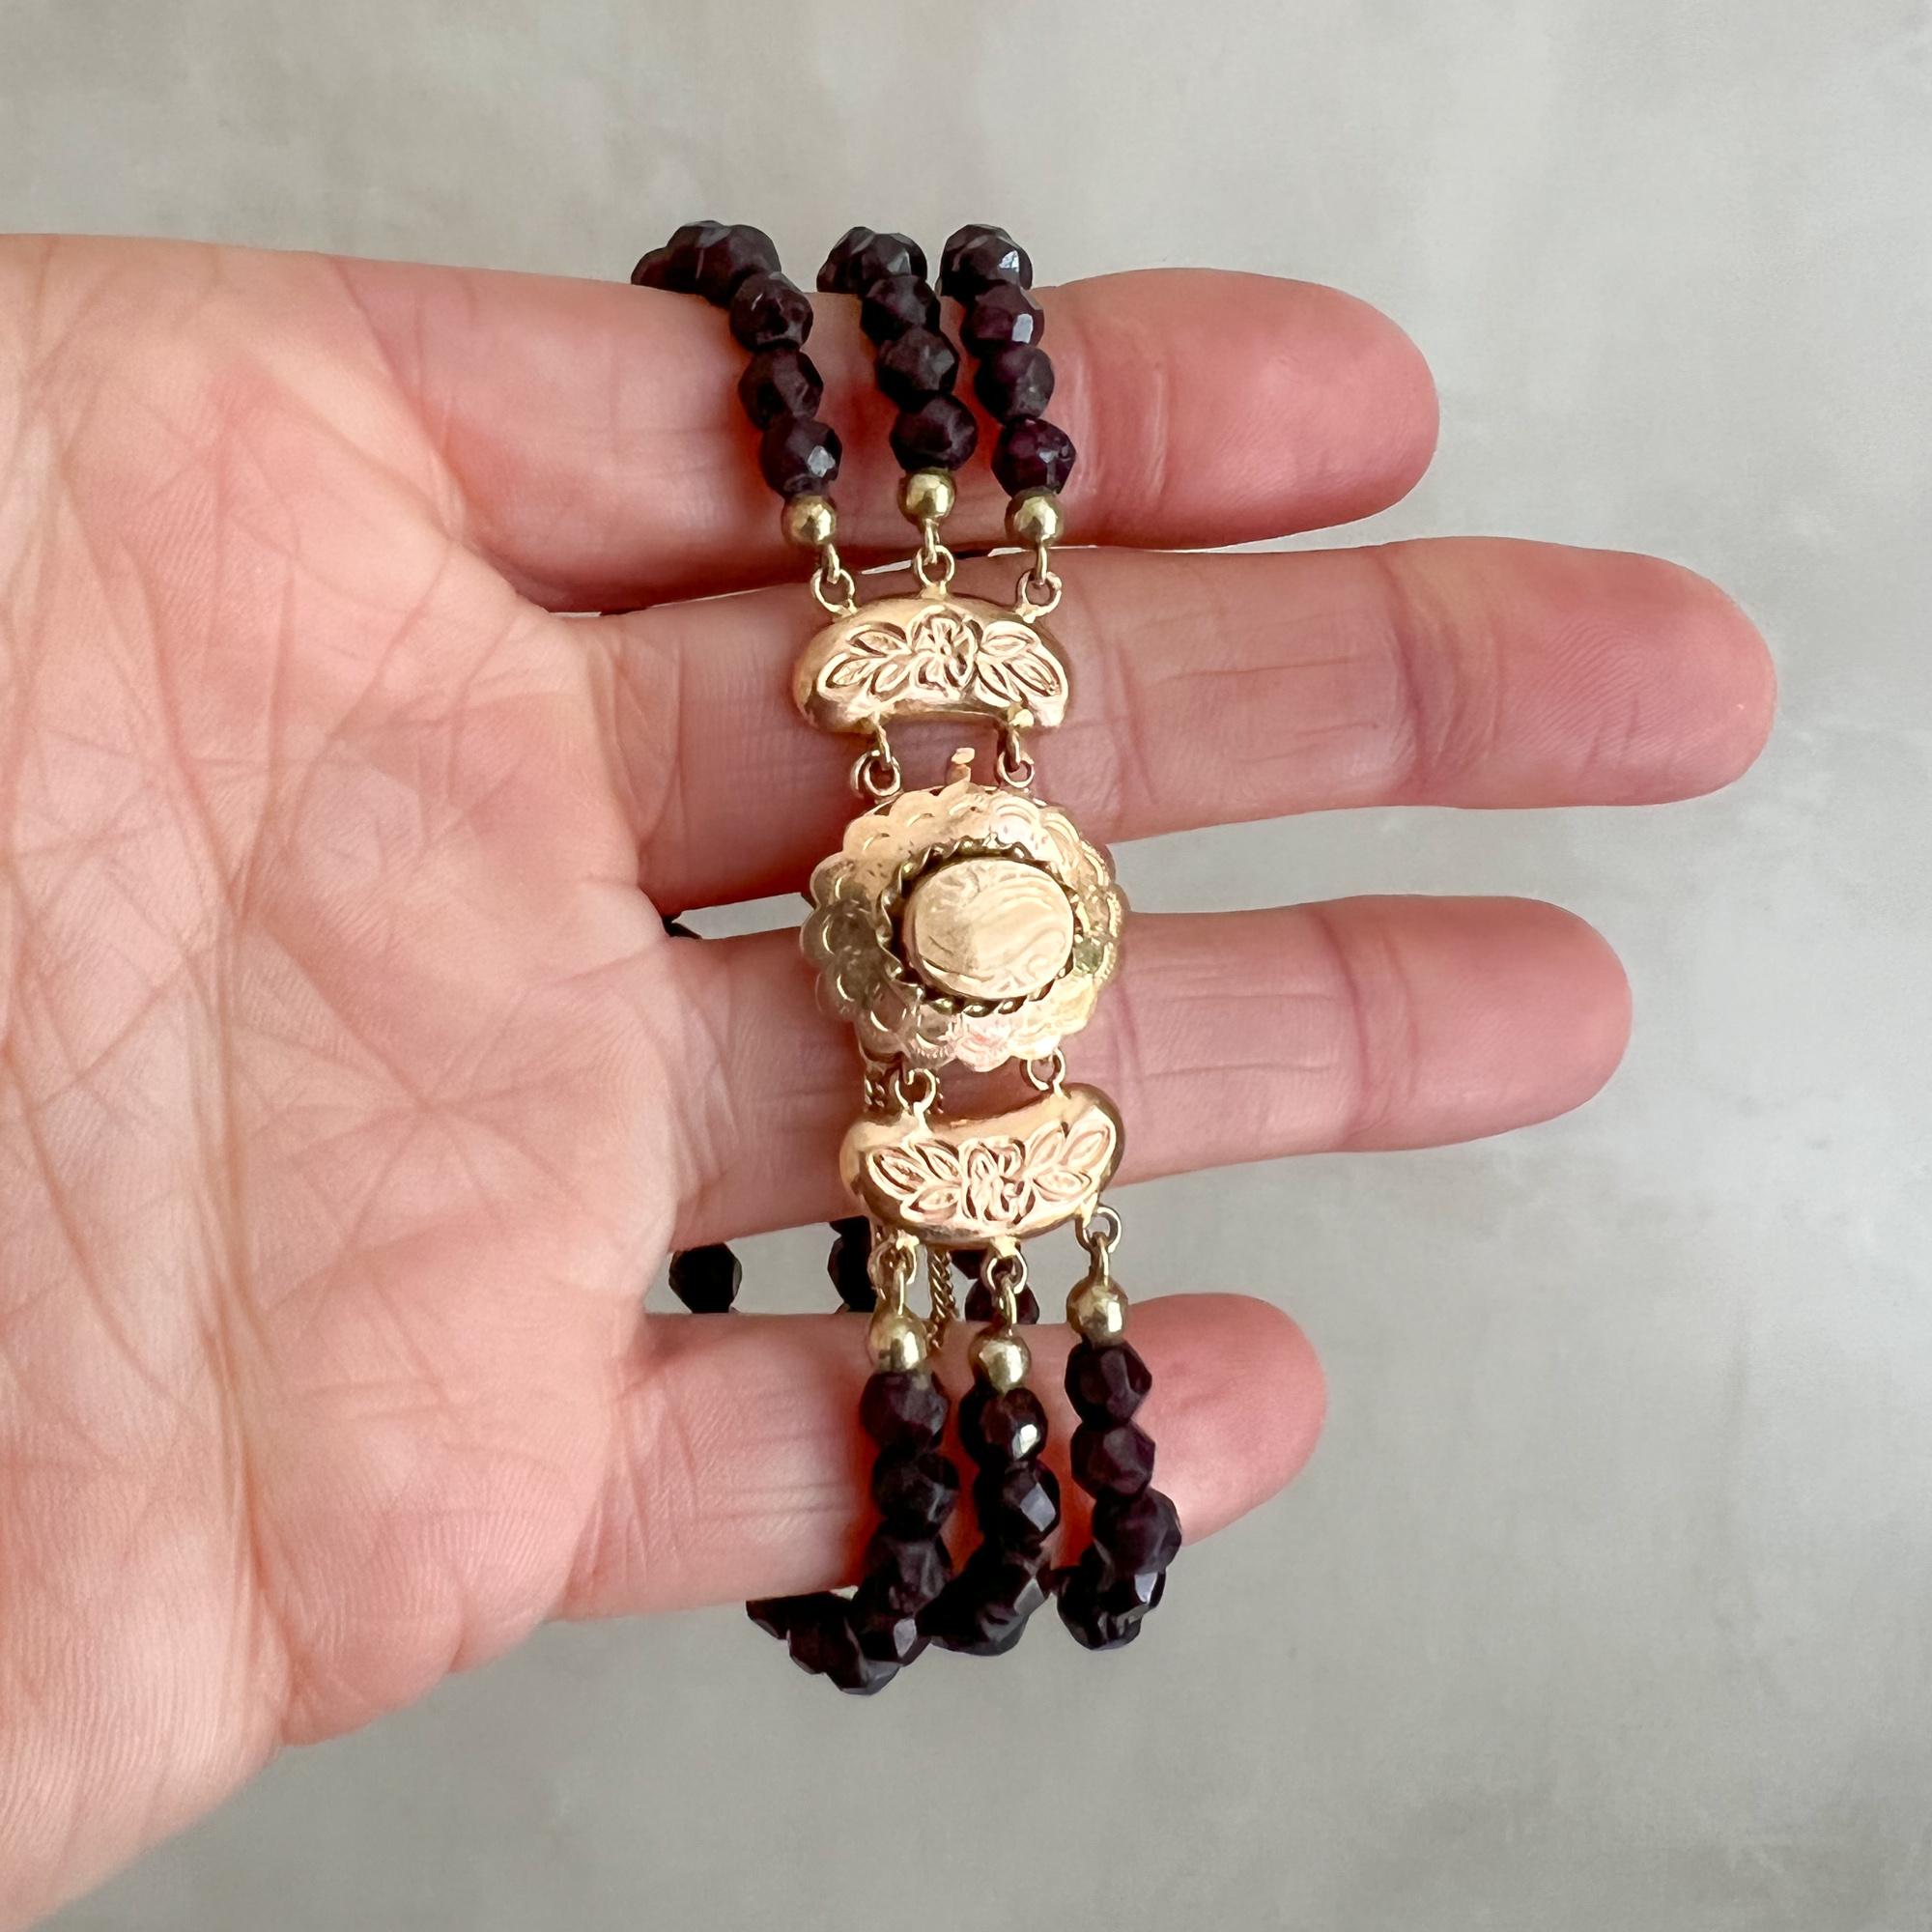 This is an antique three-strand 14 karat yellow gold garnet bracelet. The oval-shaped clasp of this bracelet is beautifully engraved with a floral design, detailed figures and a scalloped border. The raised center of the clasp is surrounded with a